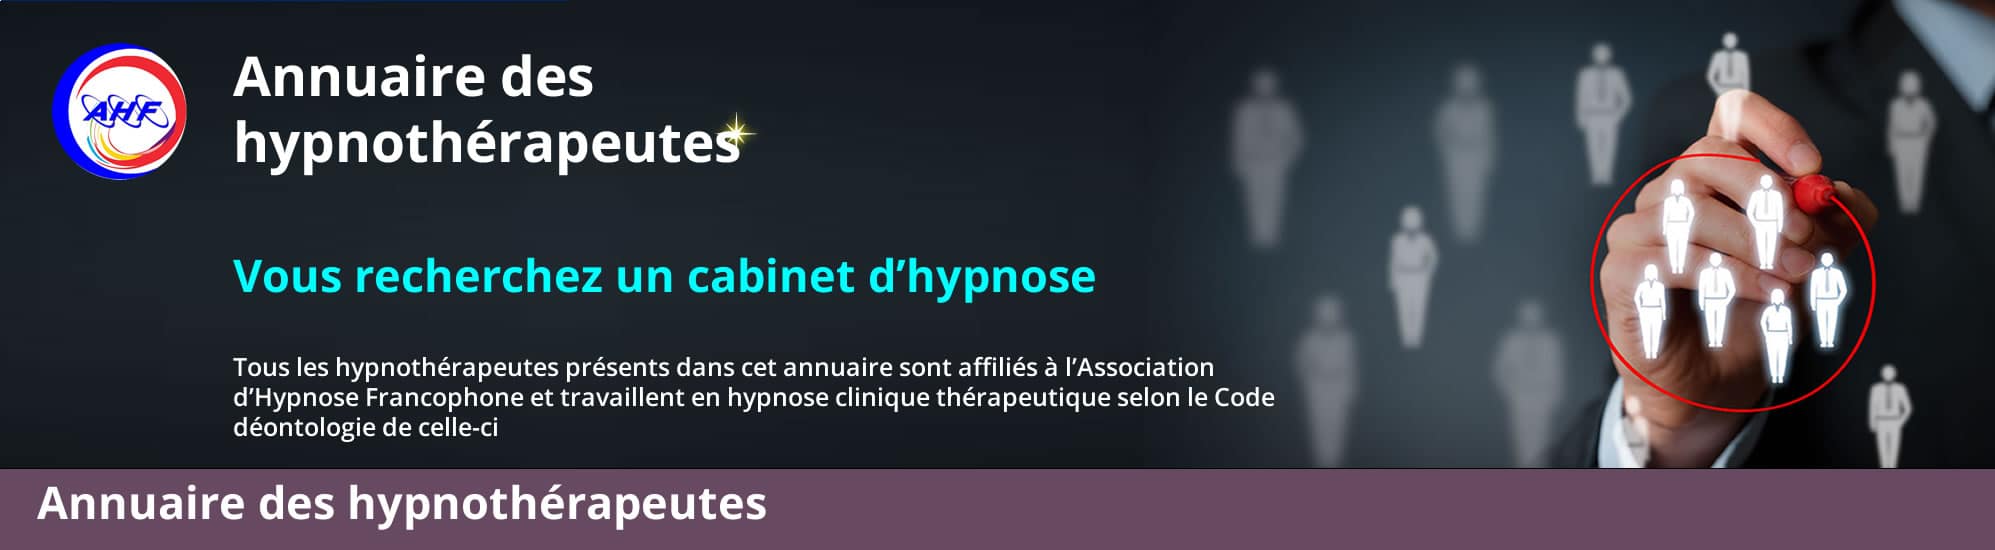 hypnose annuaire hypnotherapeute